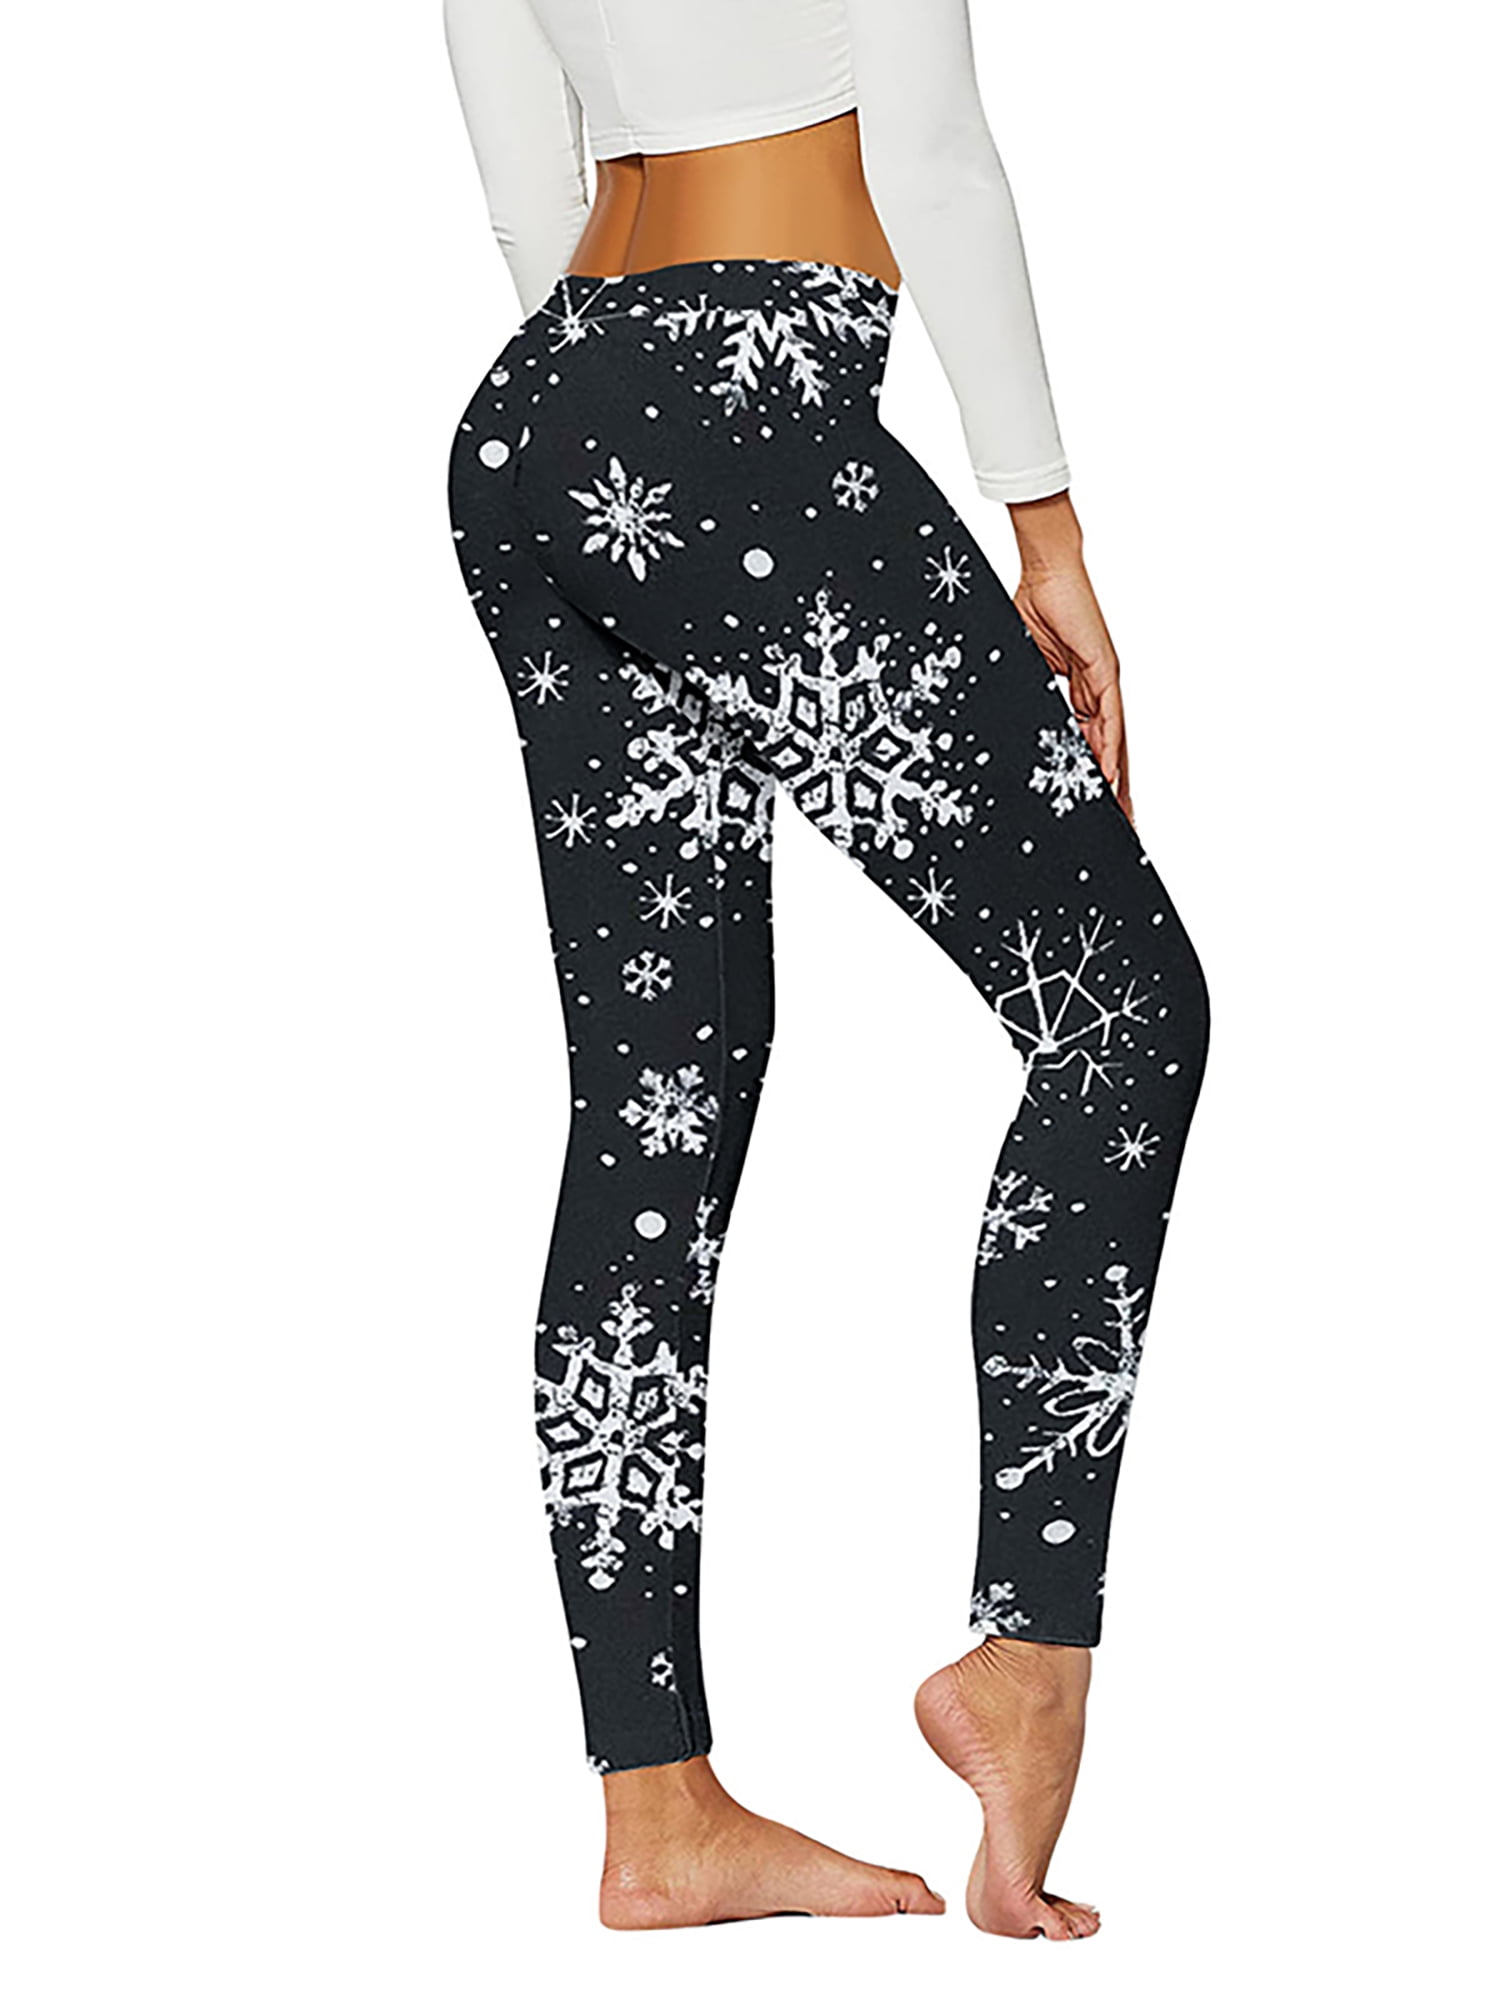 Paille Ladies Snowflake Print Skinny Bottoms Soft Festival Xmas Pants  Stretchy Holiday Tights Christmas Leggings Style-V L